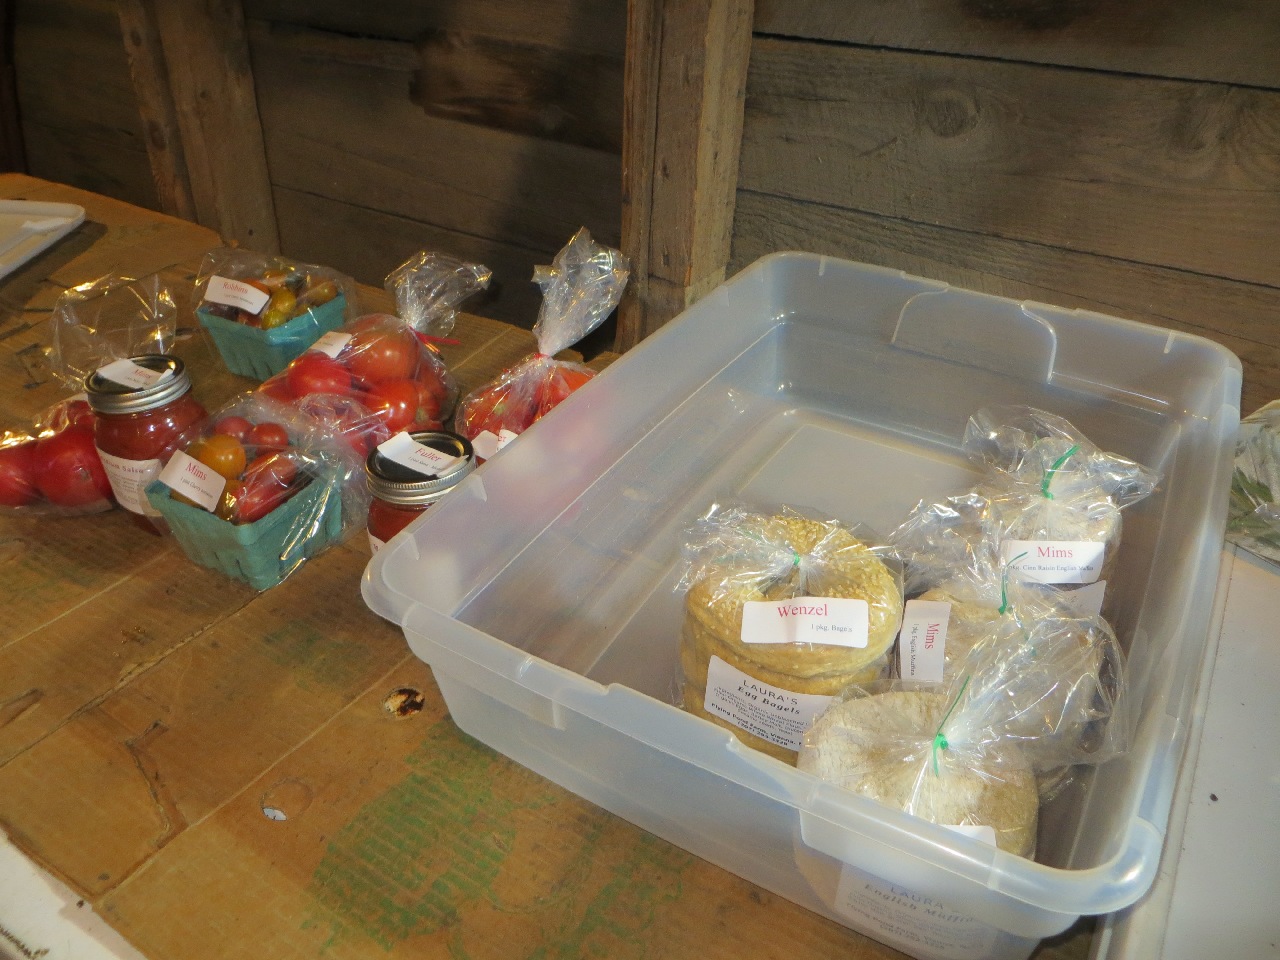 A plastic storage tub holding a bag of bagels and three bags of English muffins. Next to it are some bags of tomatoes, pints of cherry tomatoes, and jars of salsa.